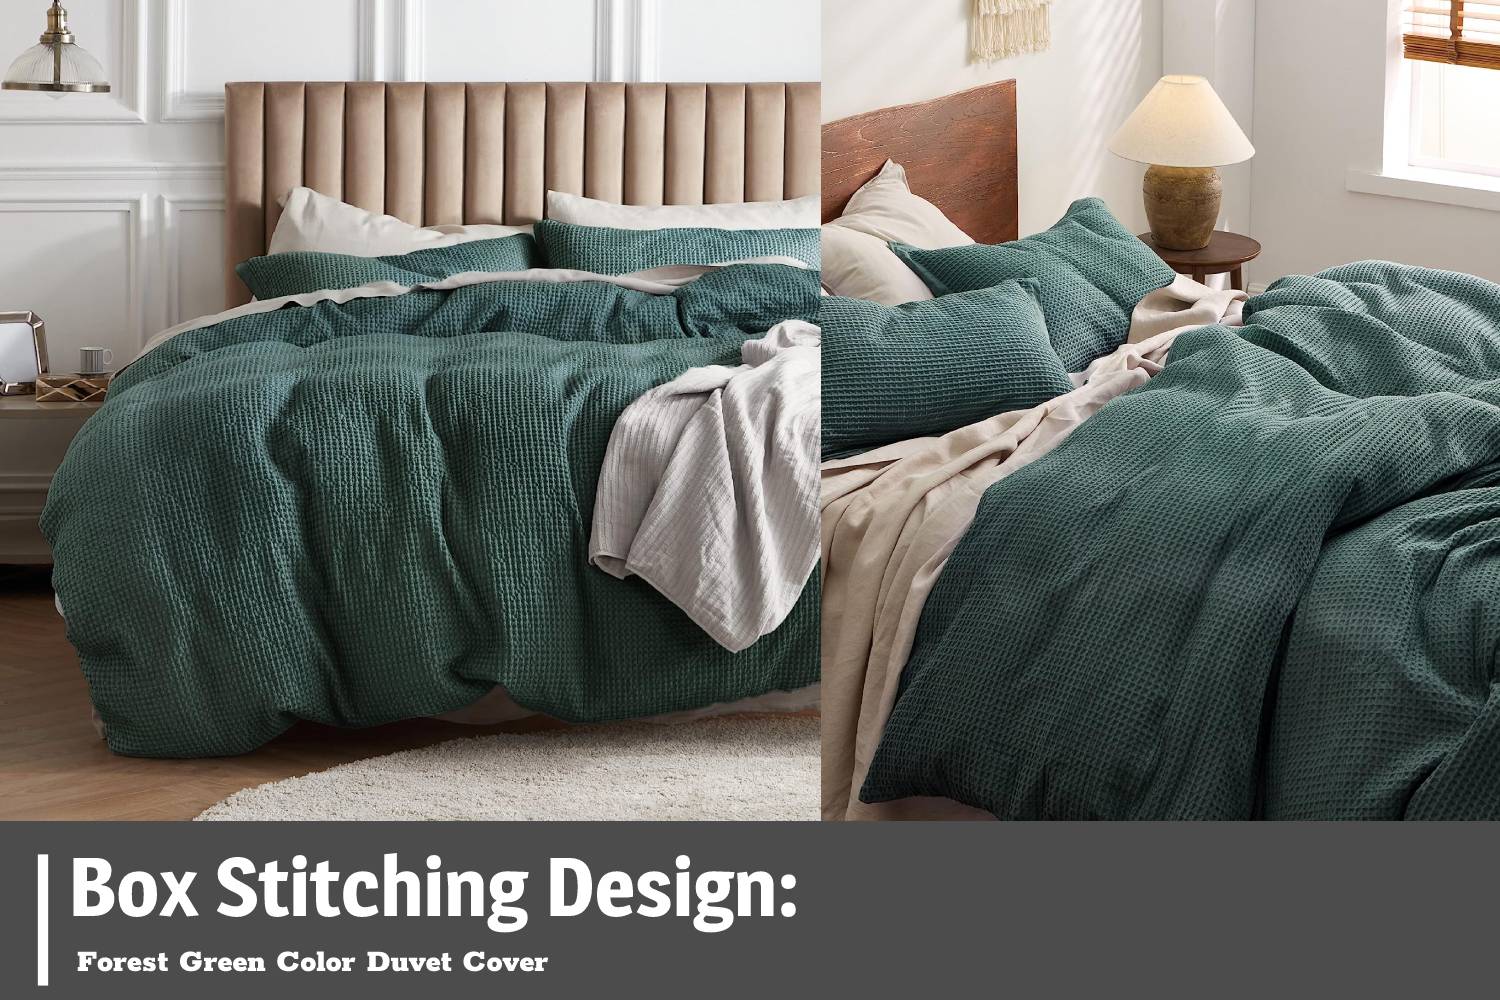 Box stitching design: Forest green color duvet cover